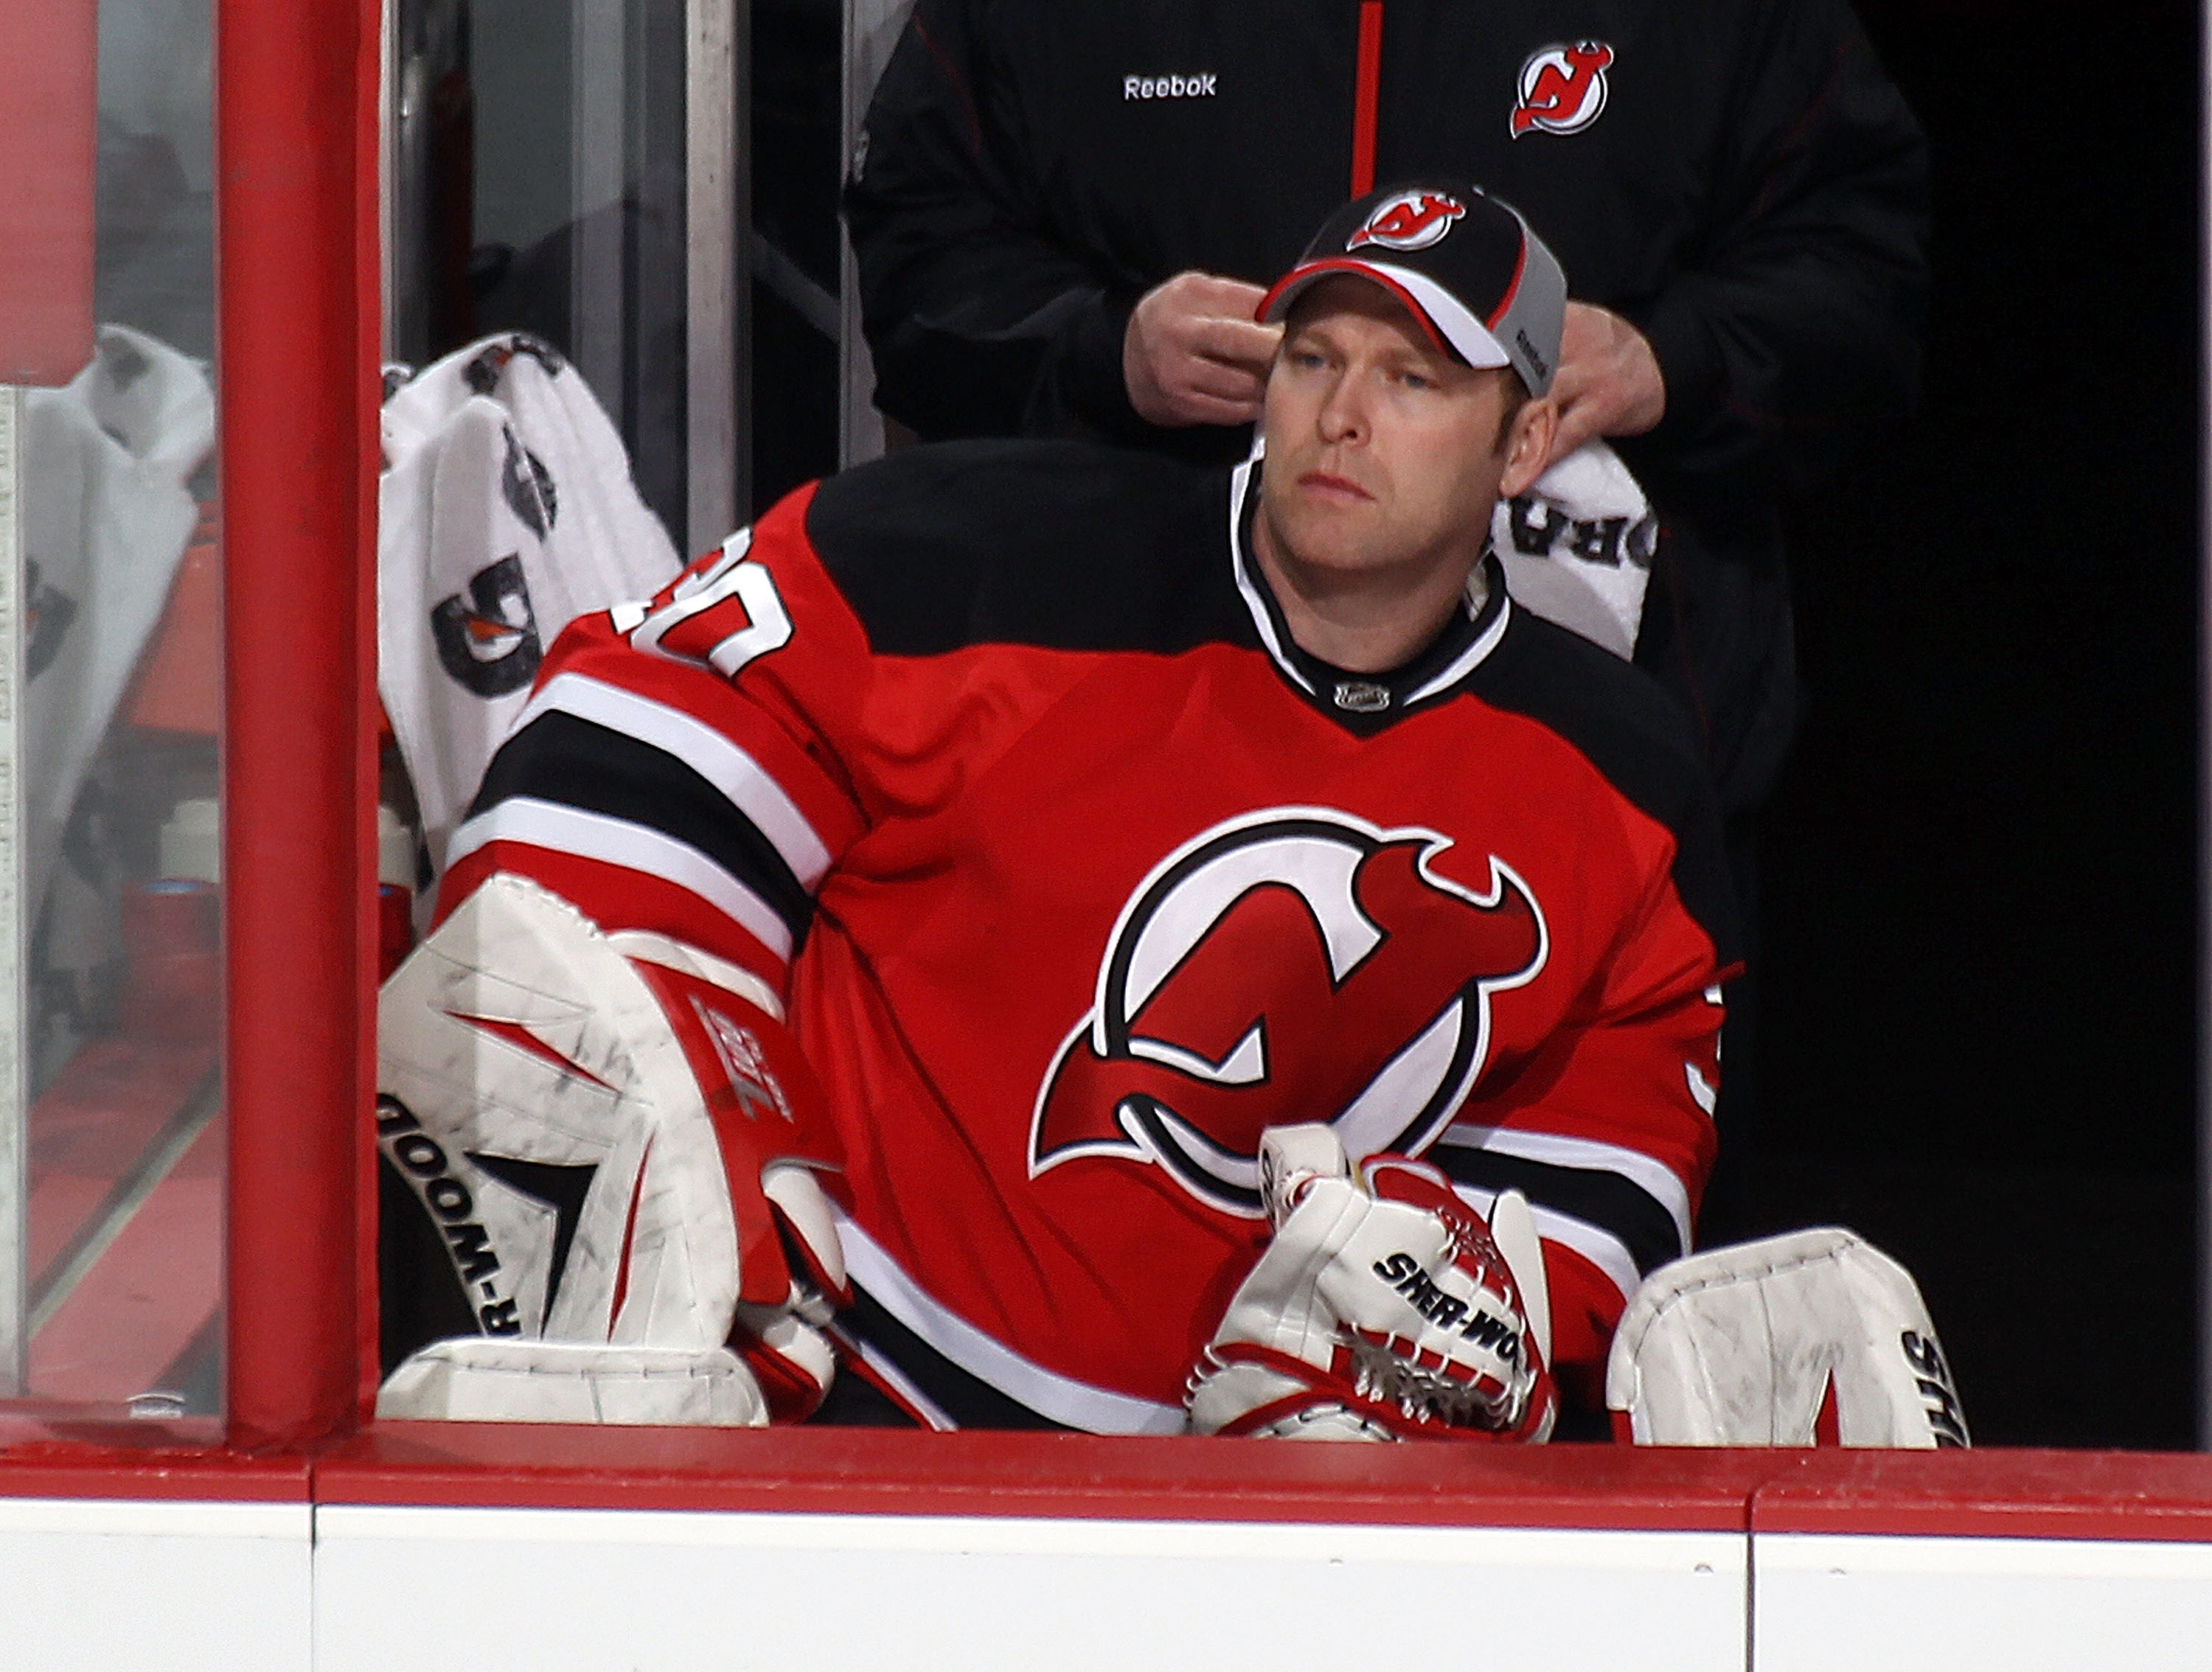 NEWARK, NJ - JANUARY 06: Martin Brodeur #30 of the New Jersey Devils watches the game from the bench against the Philadelphia Flyers at the Prudential Center on January 6, 2011 in Newark, New Jersey.  (Photo by Bruce Bennett/Getty Images)